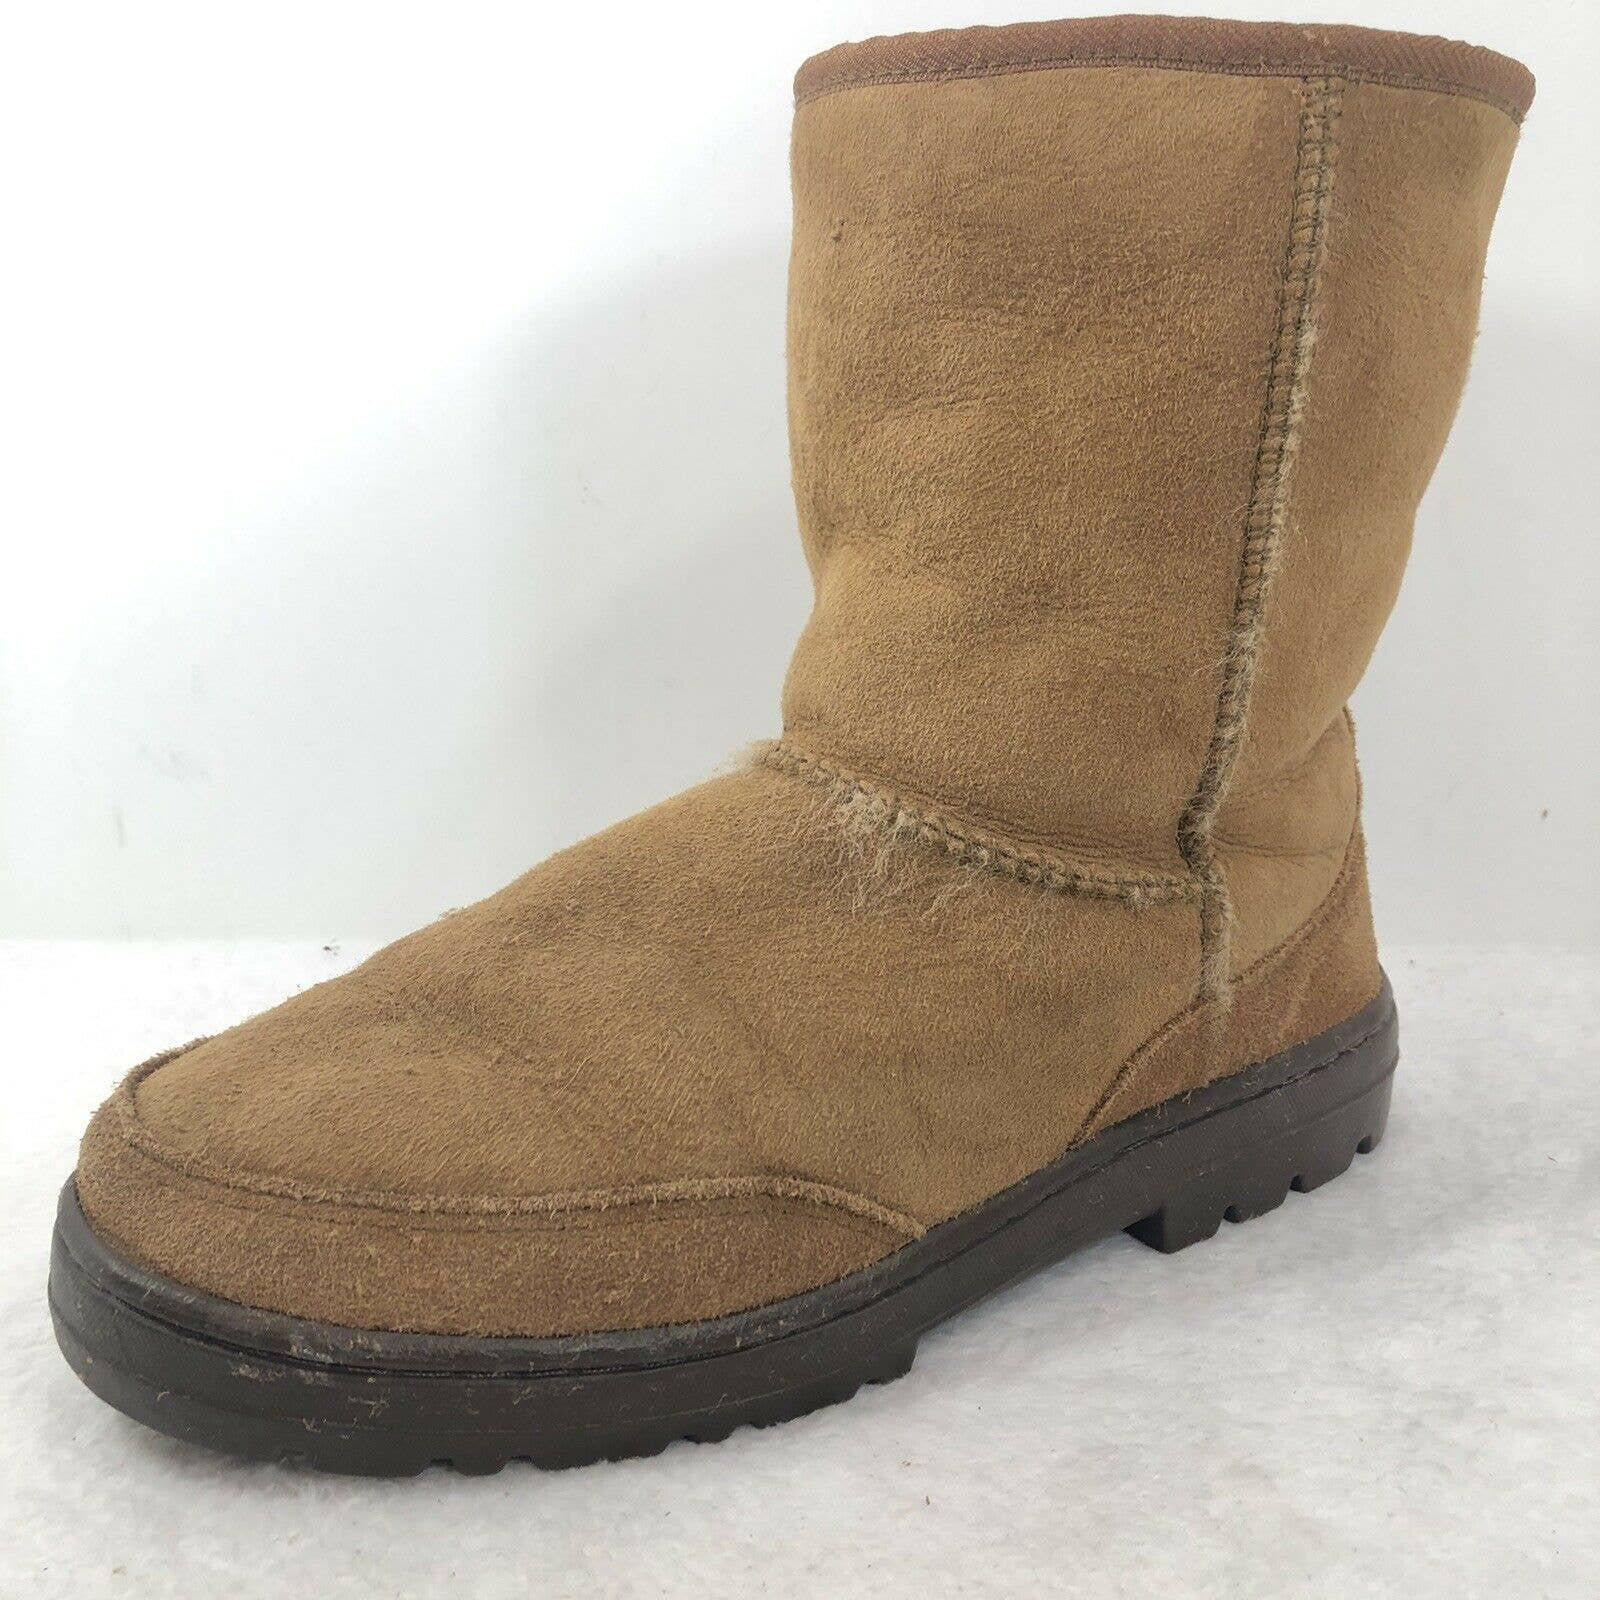 Ugg Womens Boots Size 9 Wide Ultra Short Model 5225 Made in | Etsy